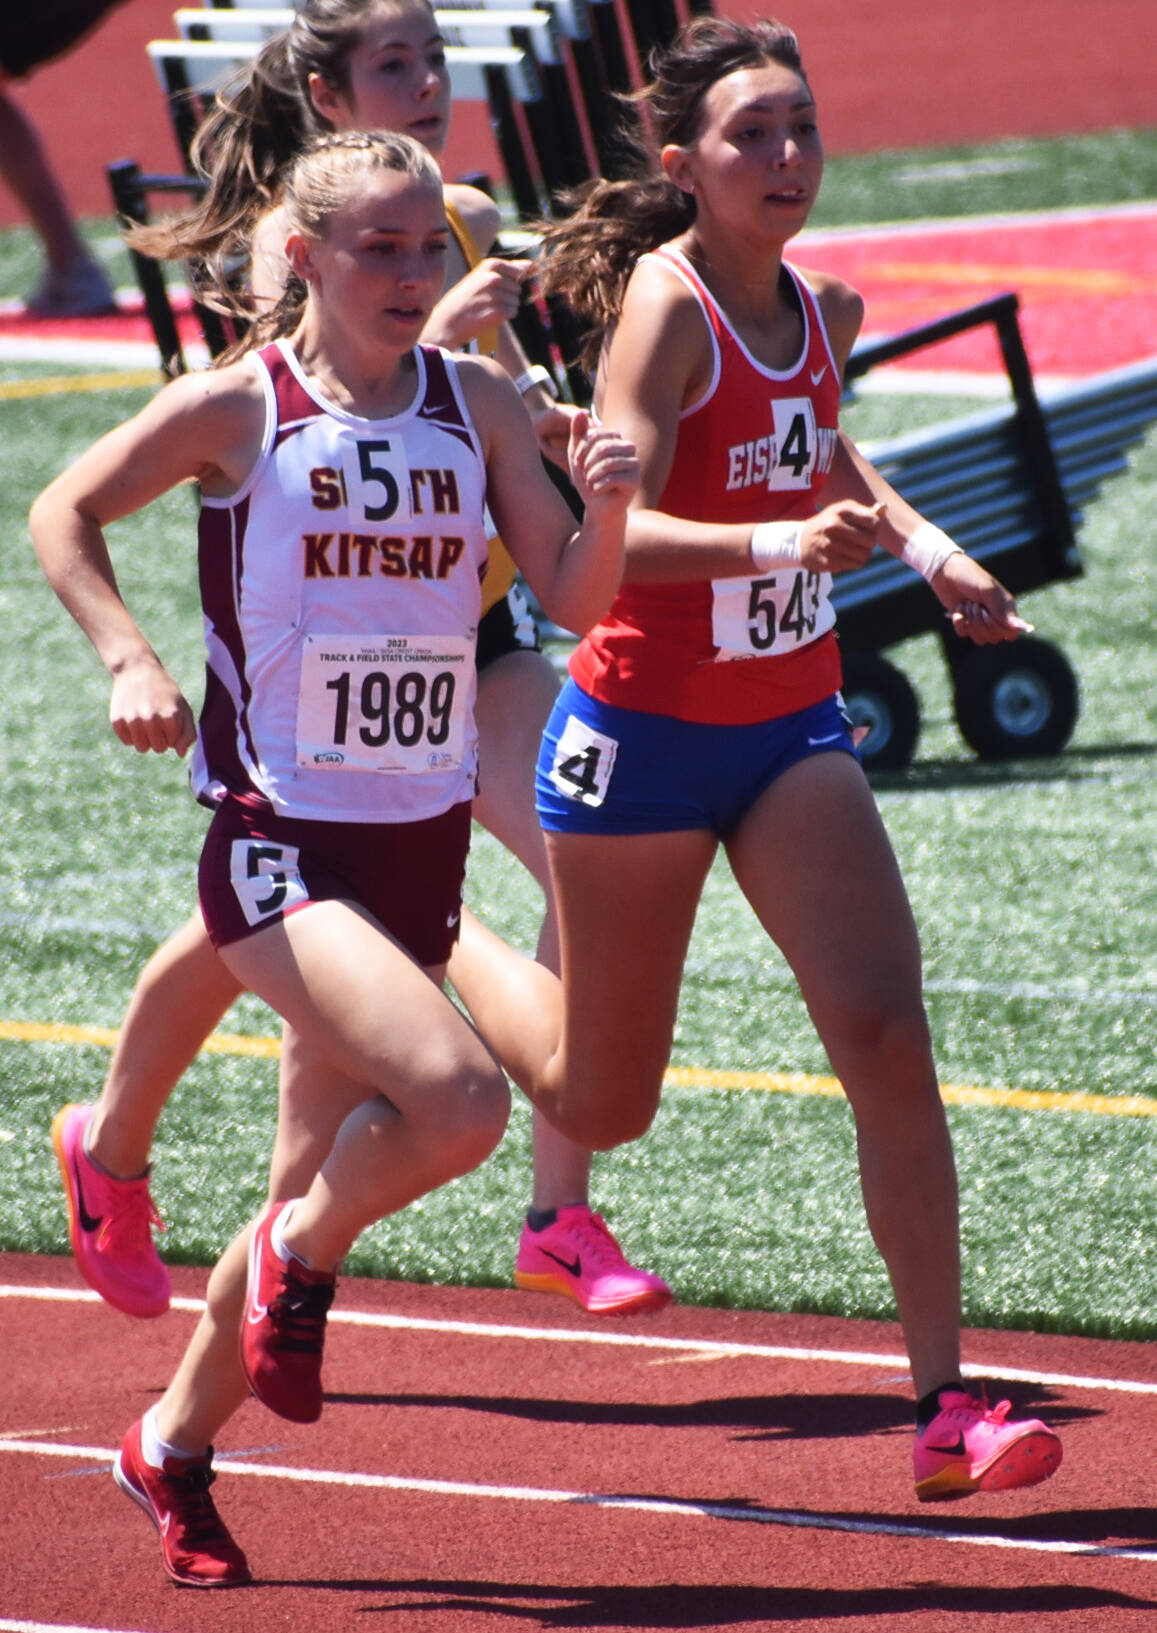 South Kitsap’s Lauren Laws finished sixth in the 1600 event.